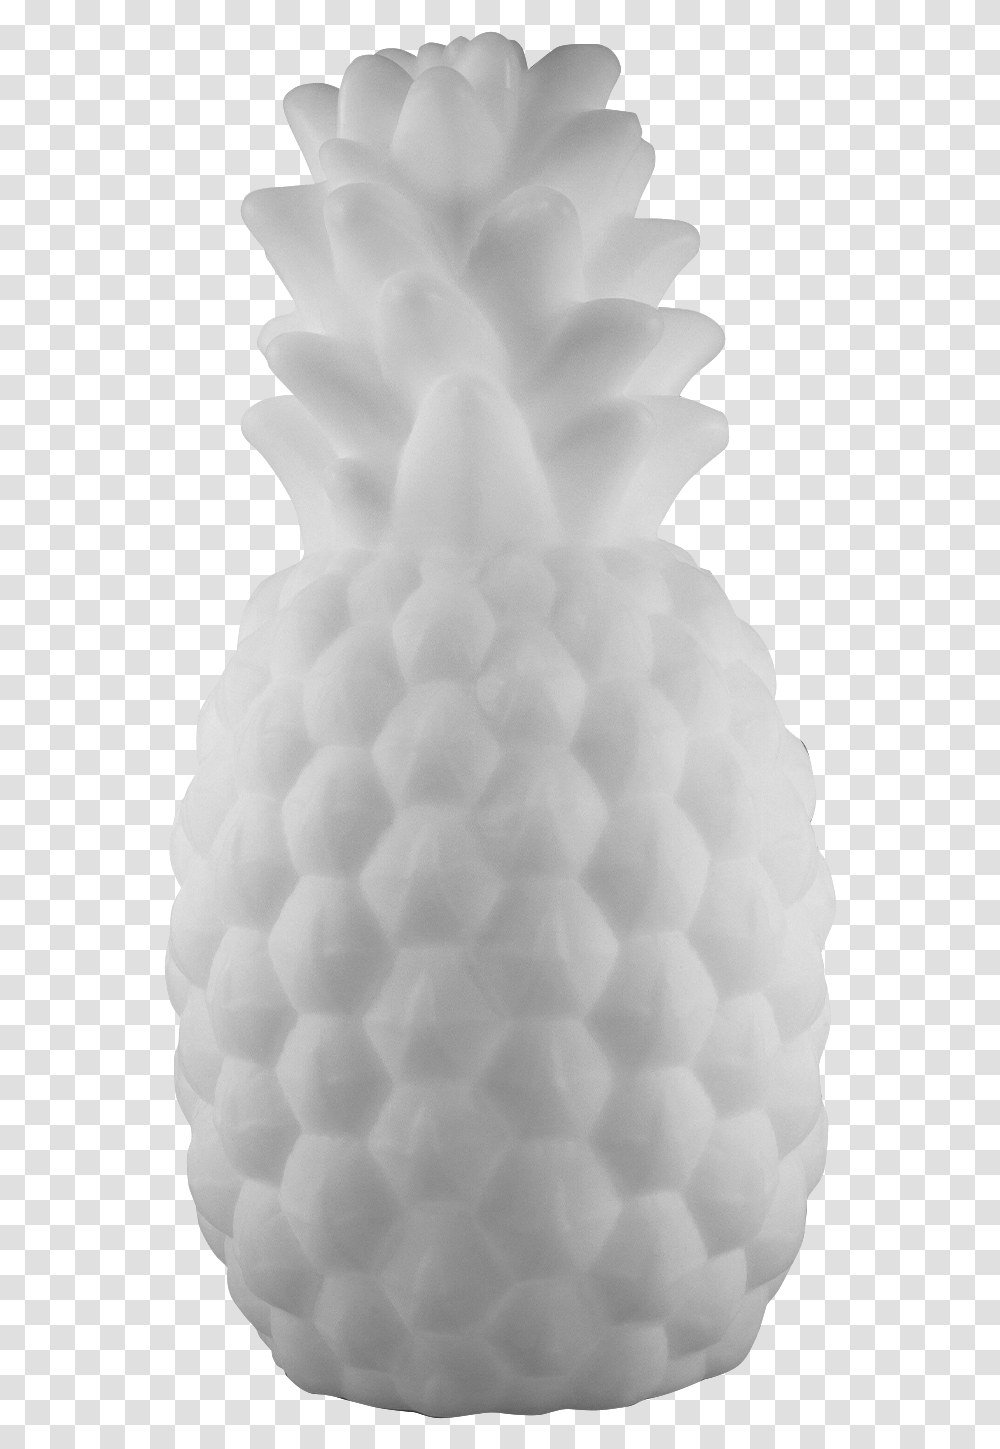 Black And White Pineapple, Pillow, Cushion, Wedding Cake, Food Transparent Png